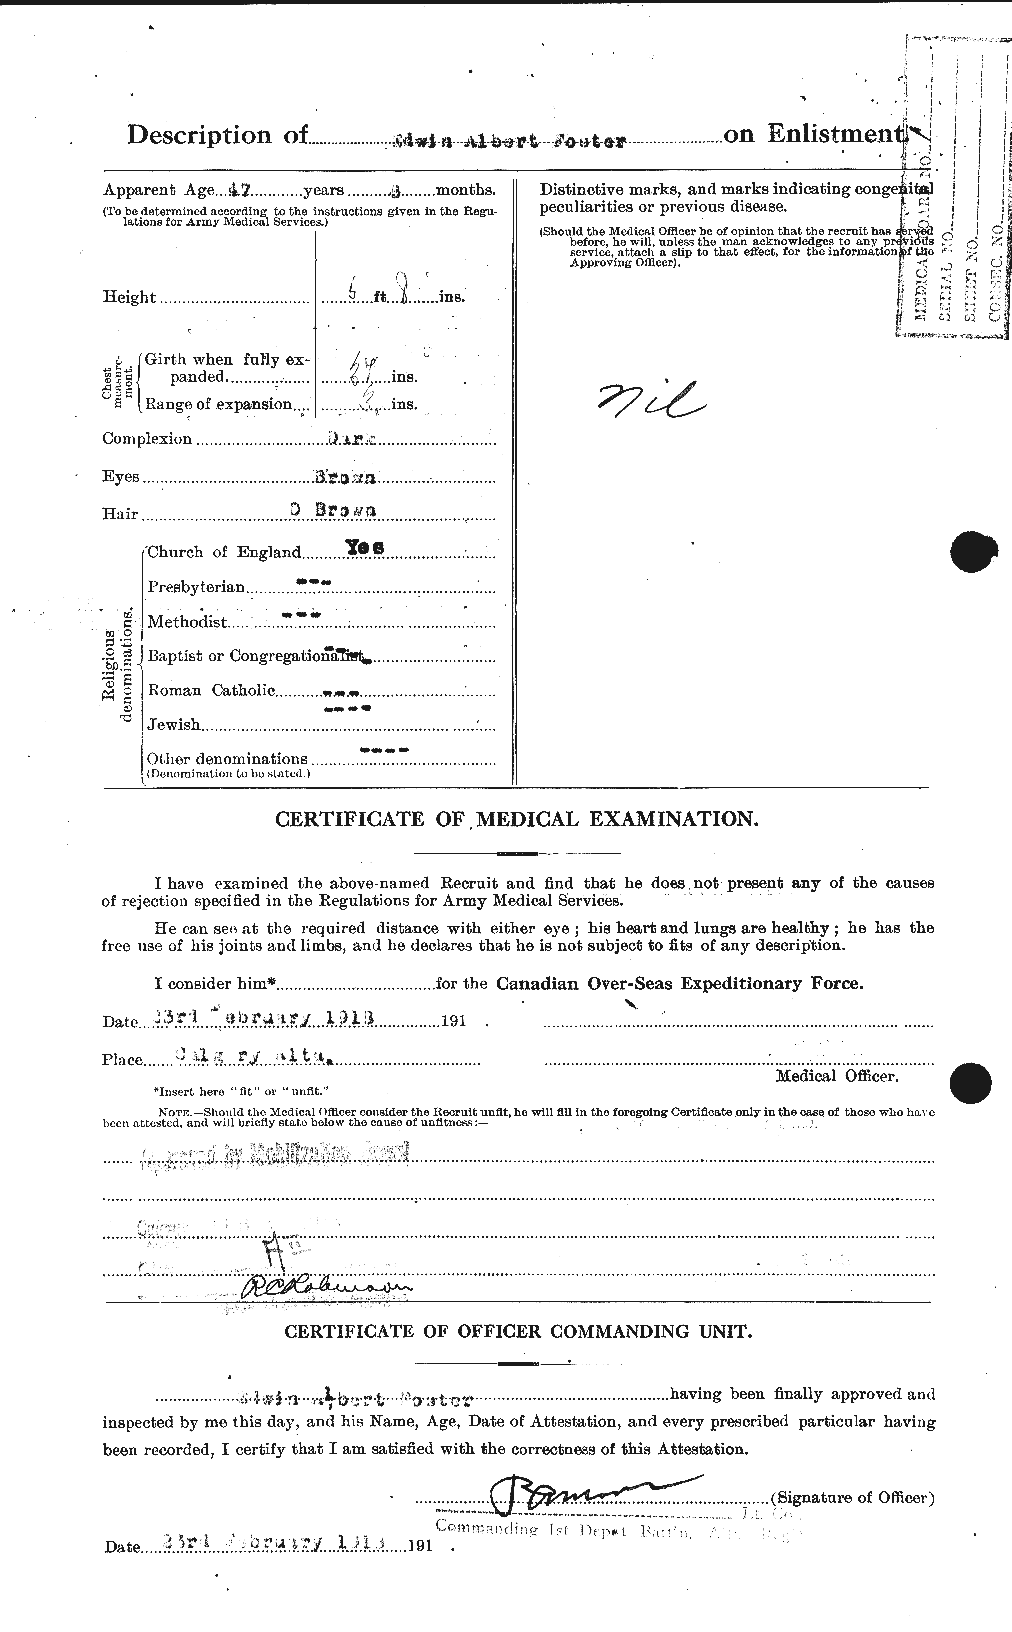 Personnel Records of the First World War - CEF 330590b